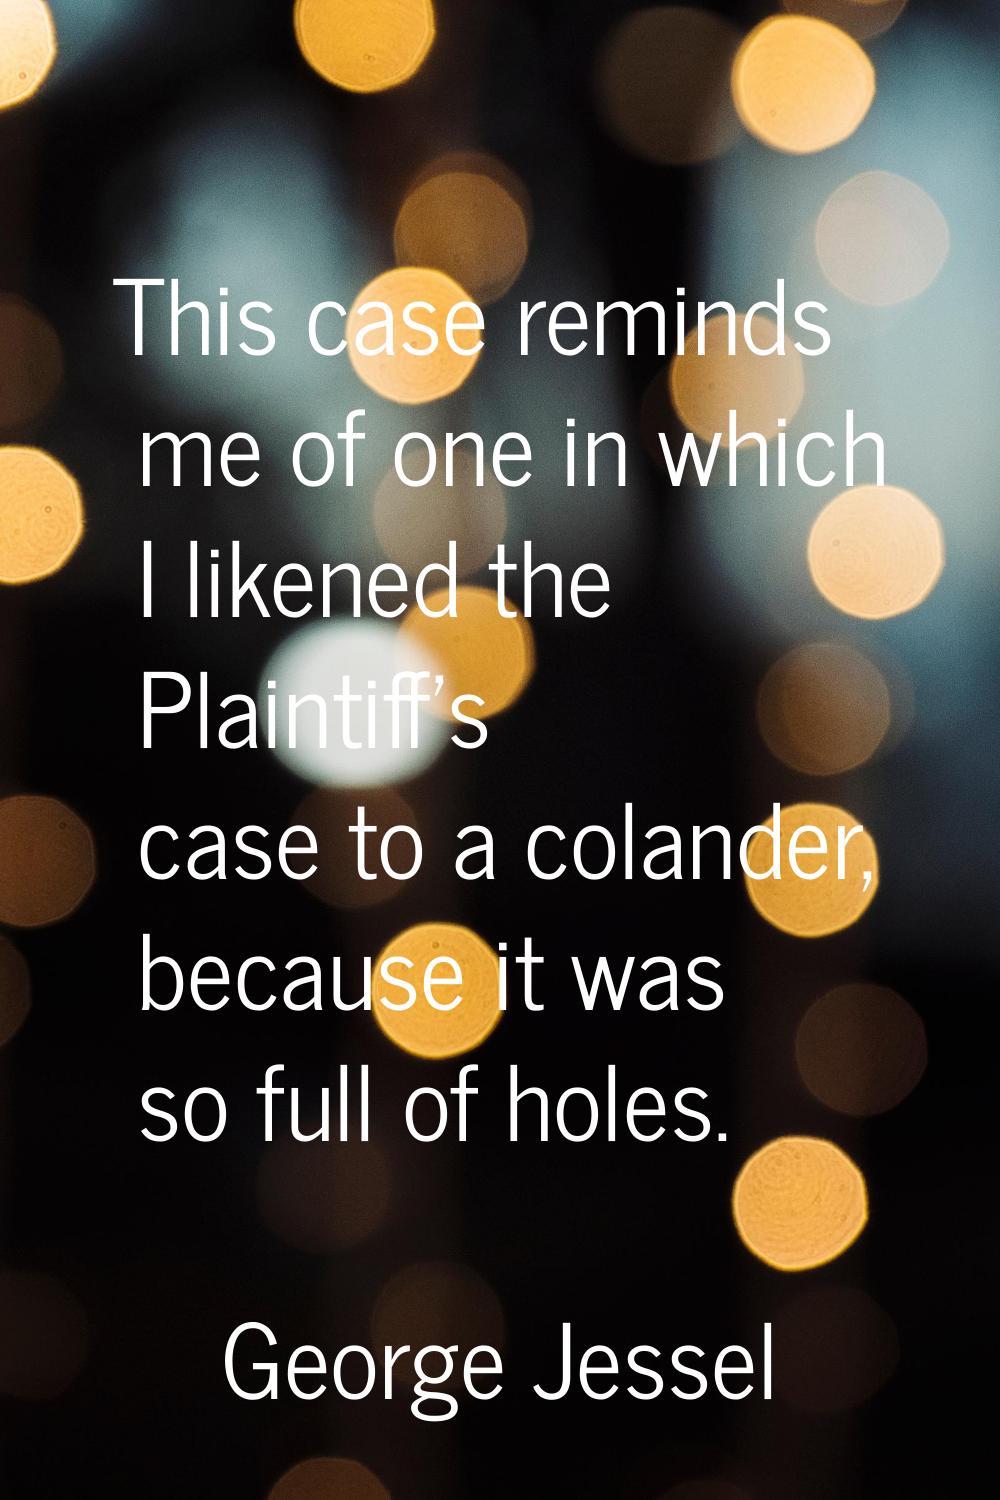 This case reminds me of one in which I likened the Plaintiff's case to a colander, because it was s